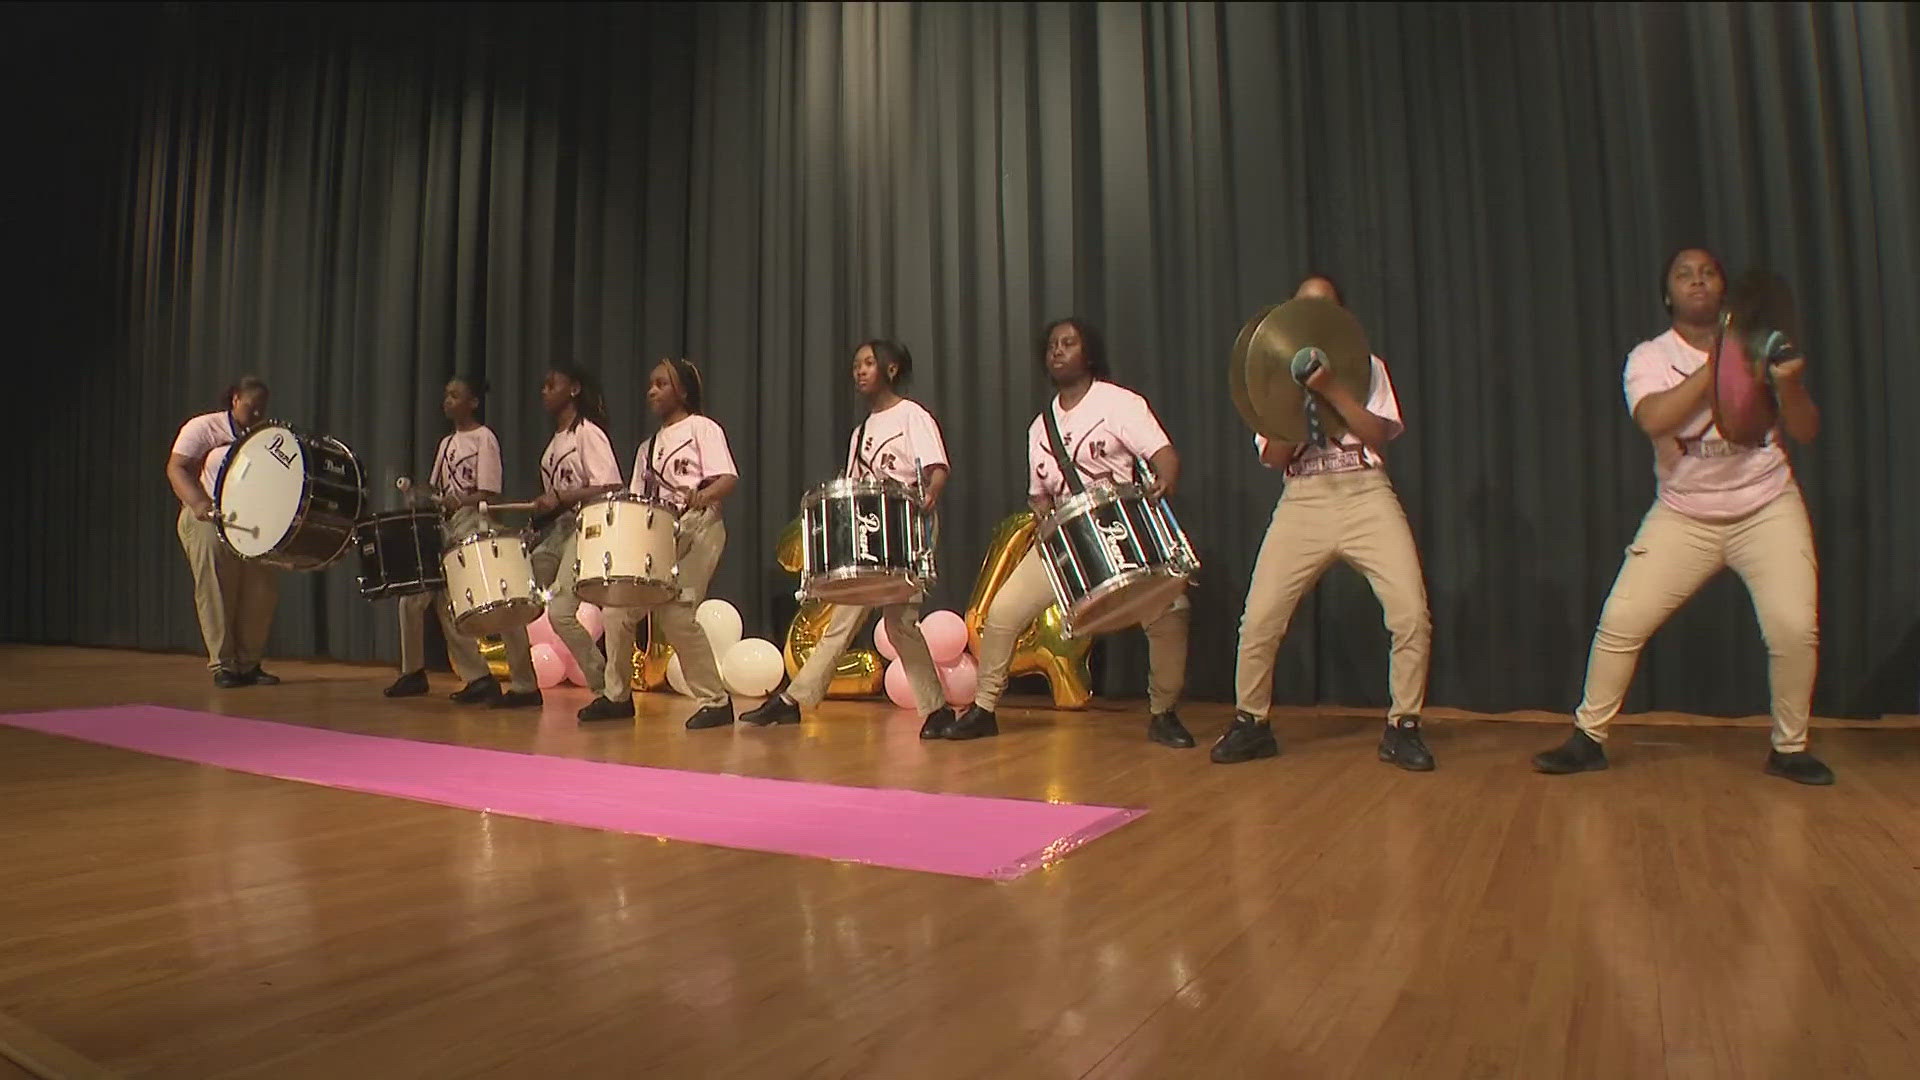 It's a first at the Coretta Scott King Young Women's Leadership Academy in Atlanta and taking the spotlight--an all-girls pink drumline who's learning the moves